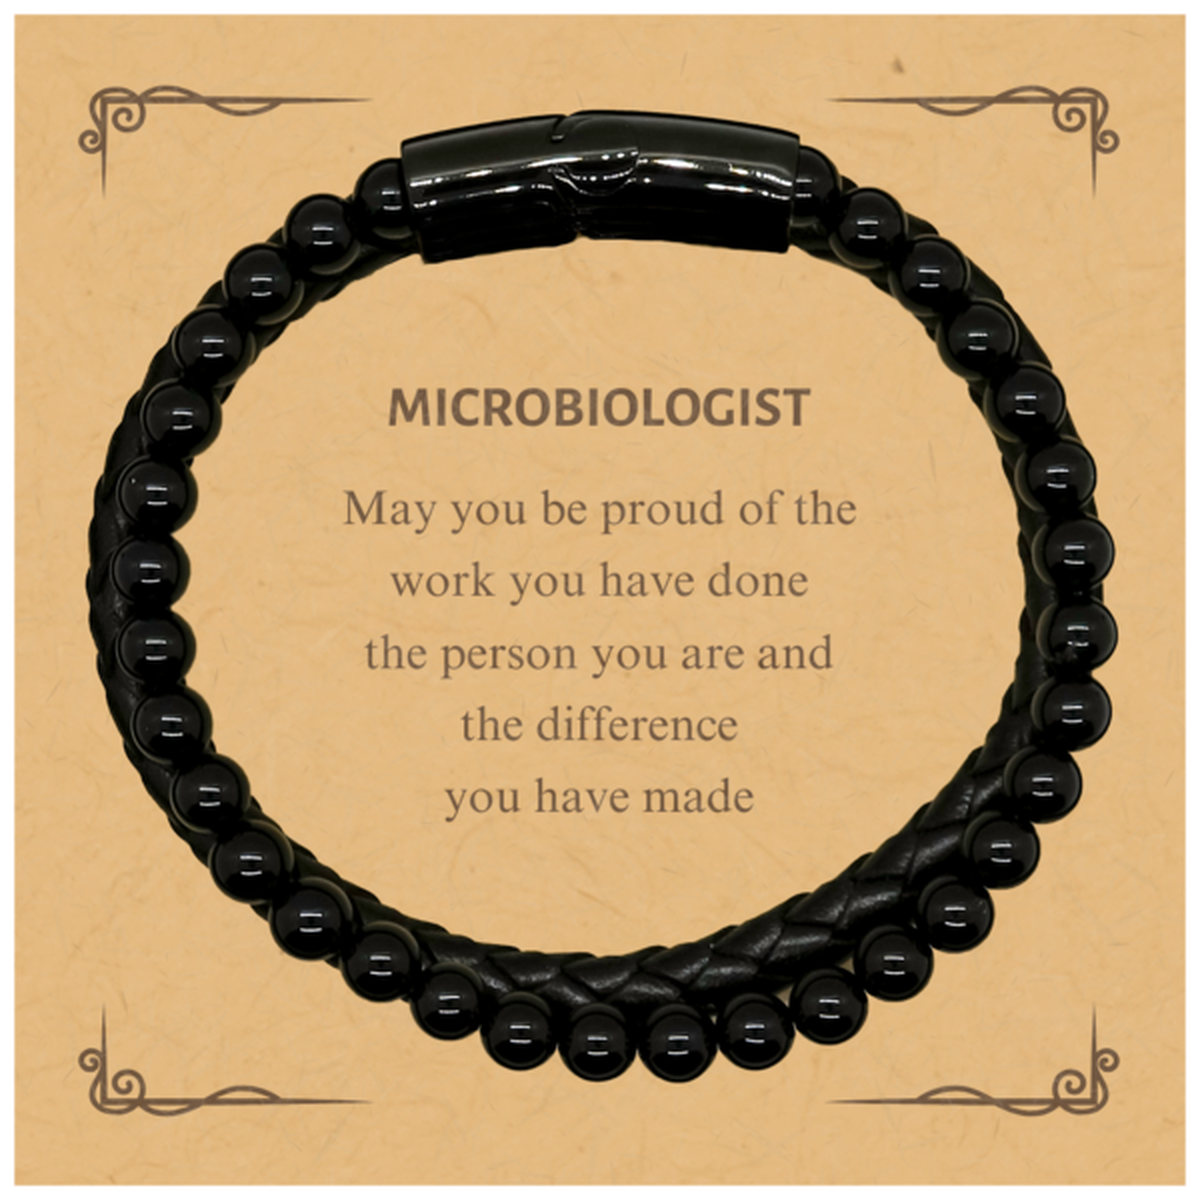 Microbiologist May you be proud of the work you have done, Retirement Microbiologist Stone Leather Bracelets for Colleague Appreciation Gifts Amazing for Microbiologist